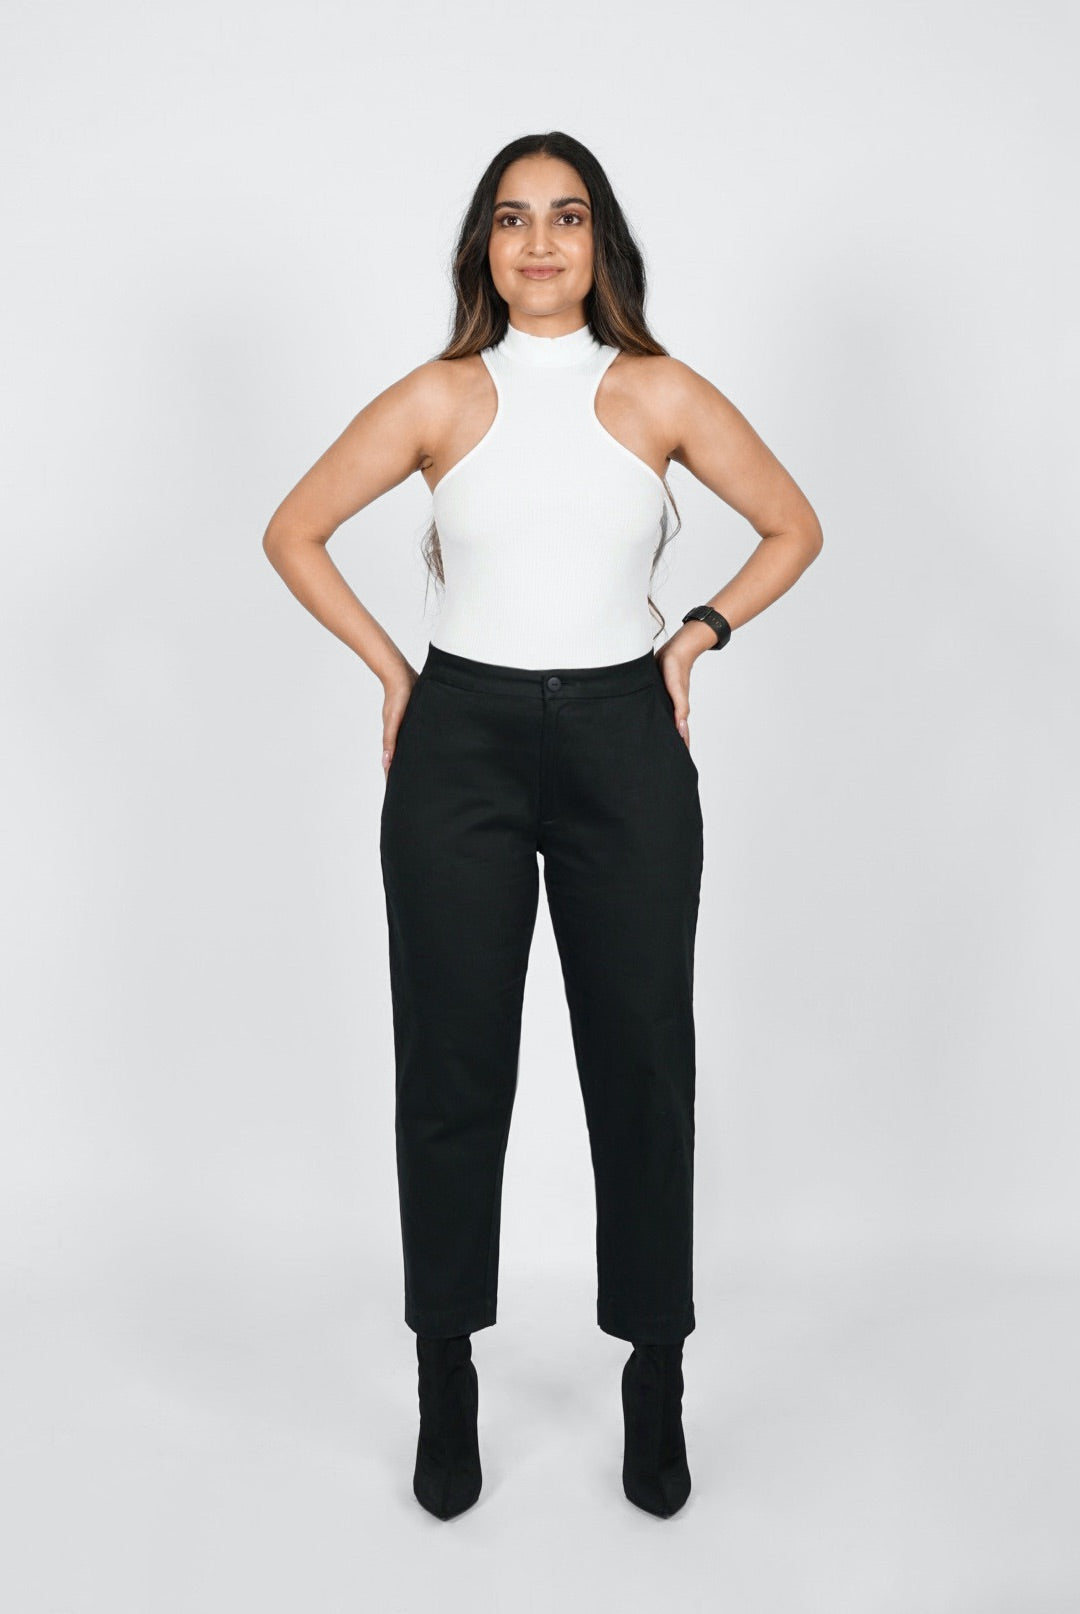 The Wide Leg Pant – Aam